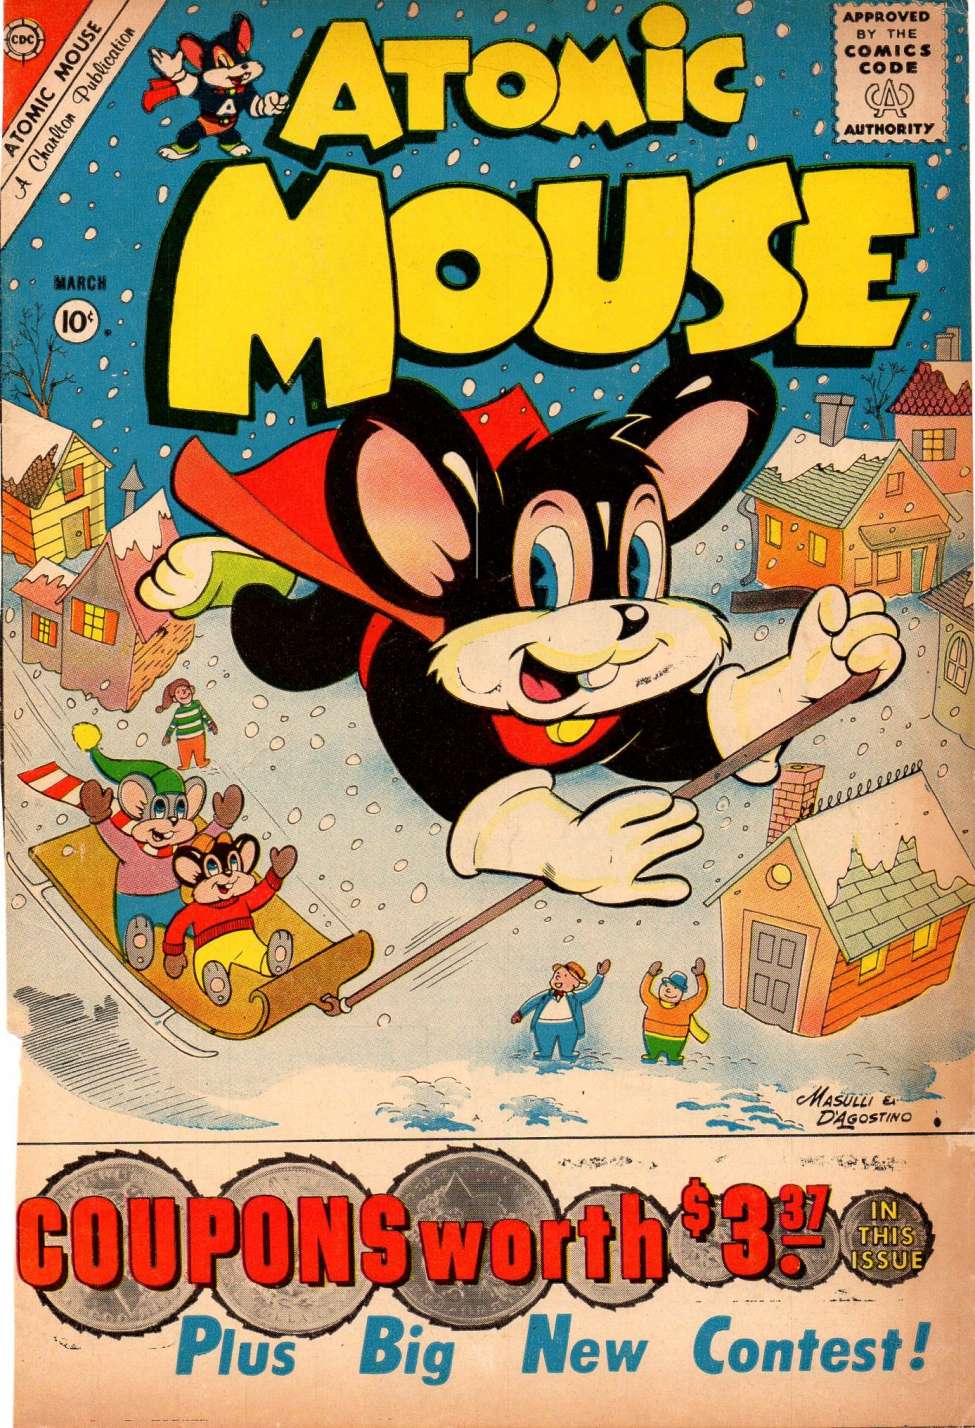 Book Cover For Atomic Mouse 41